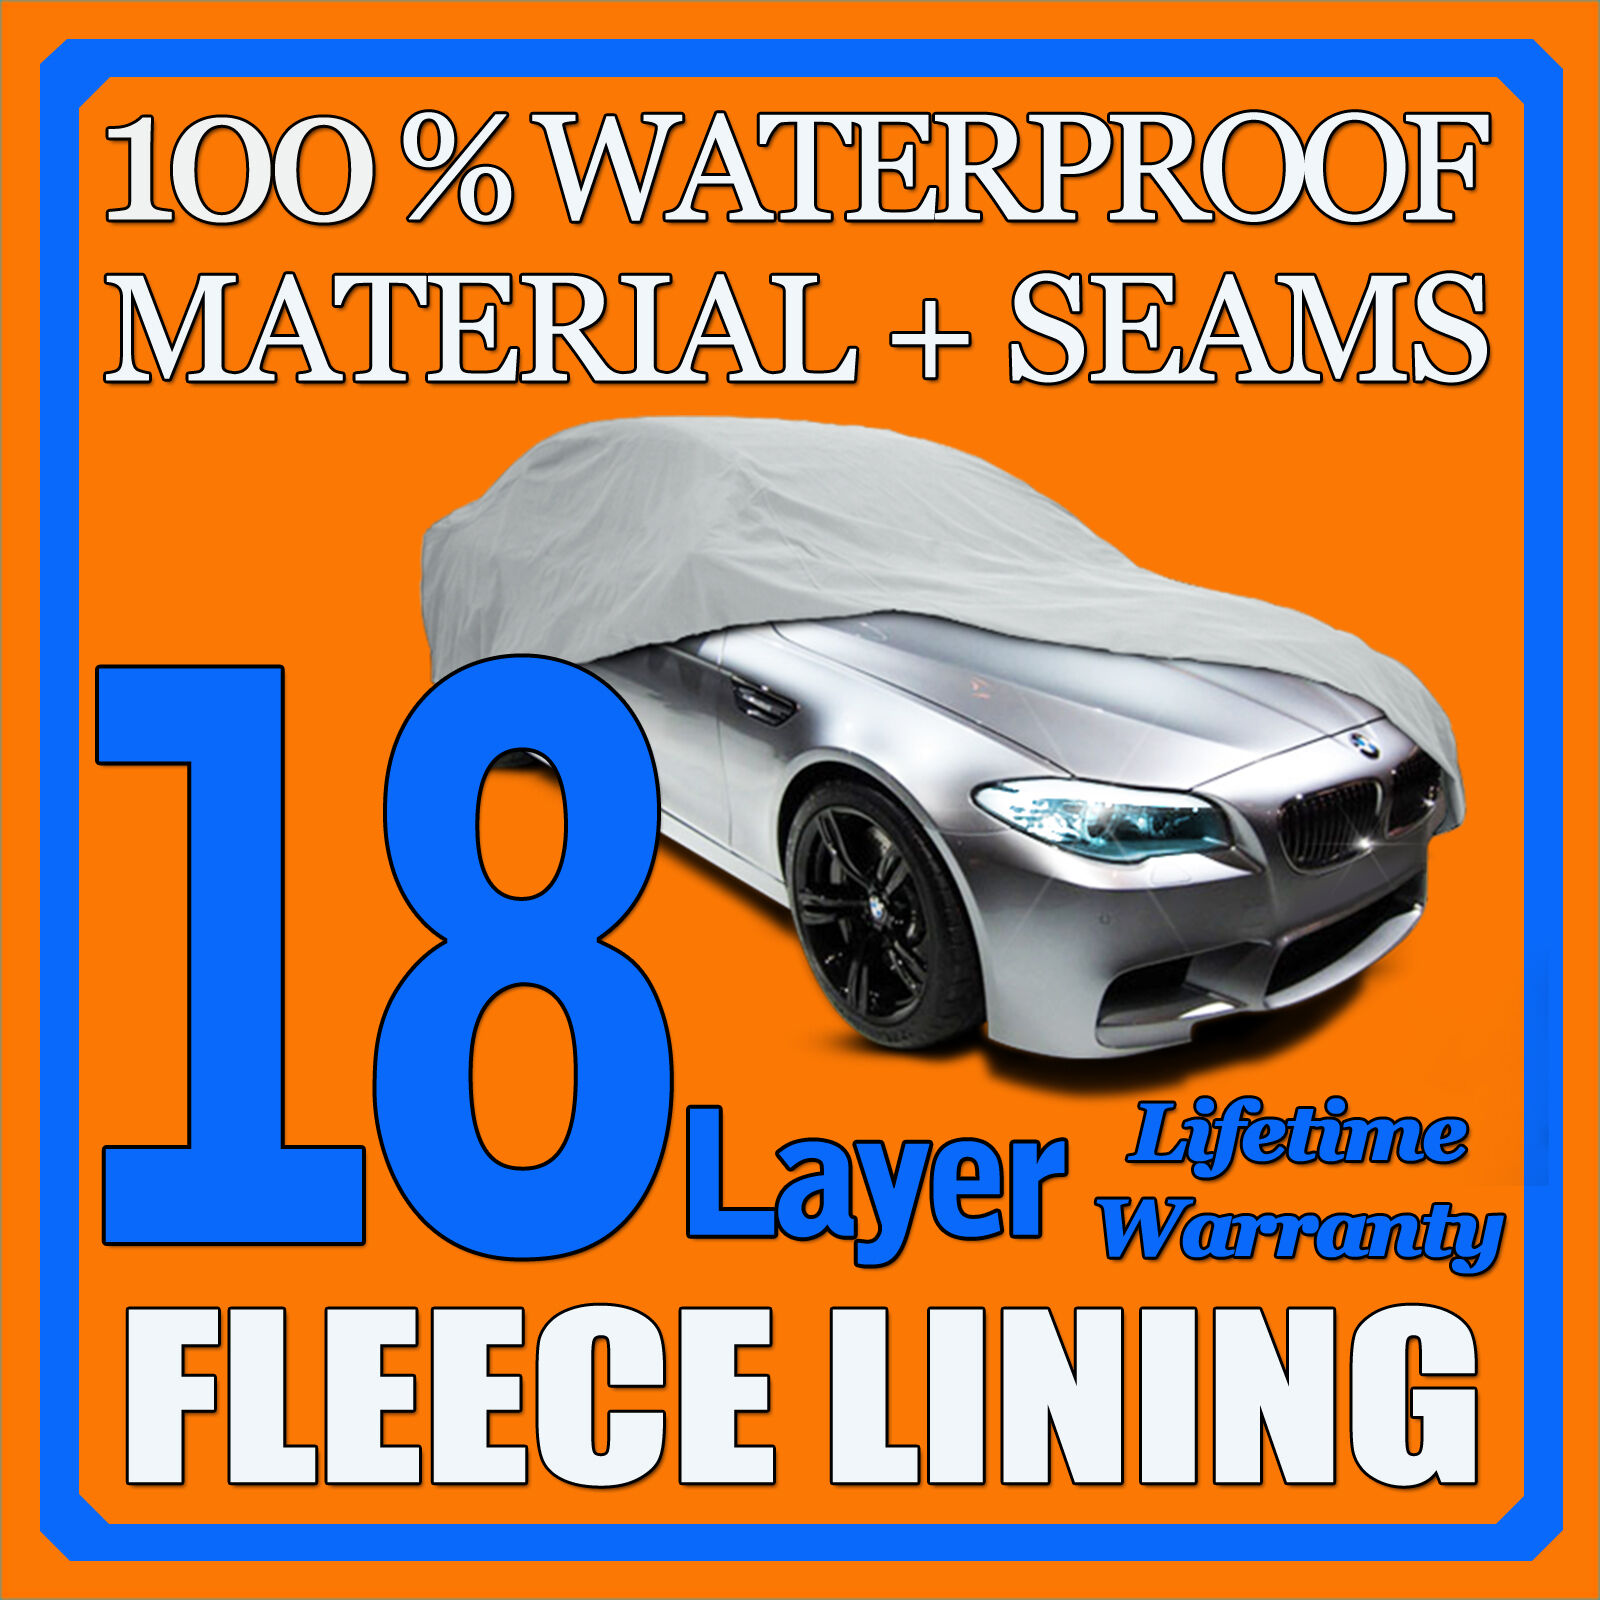 18-LAYER CAR COVER - Protect Your Car from High Exposure Area of Sun &/or Snow C